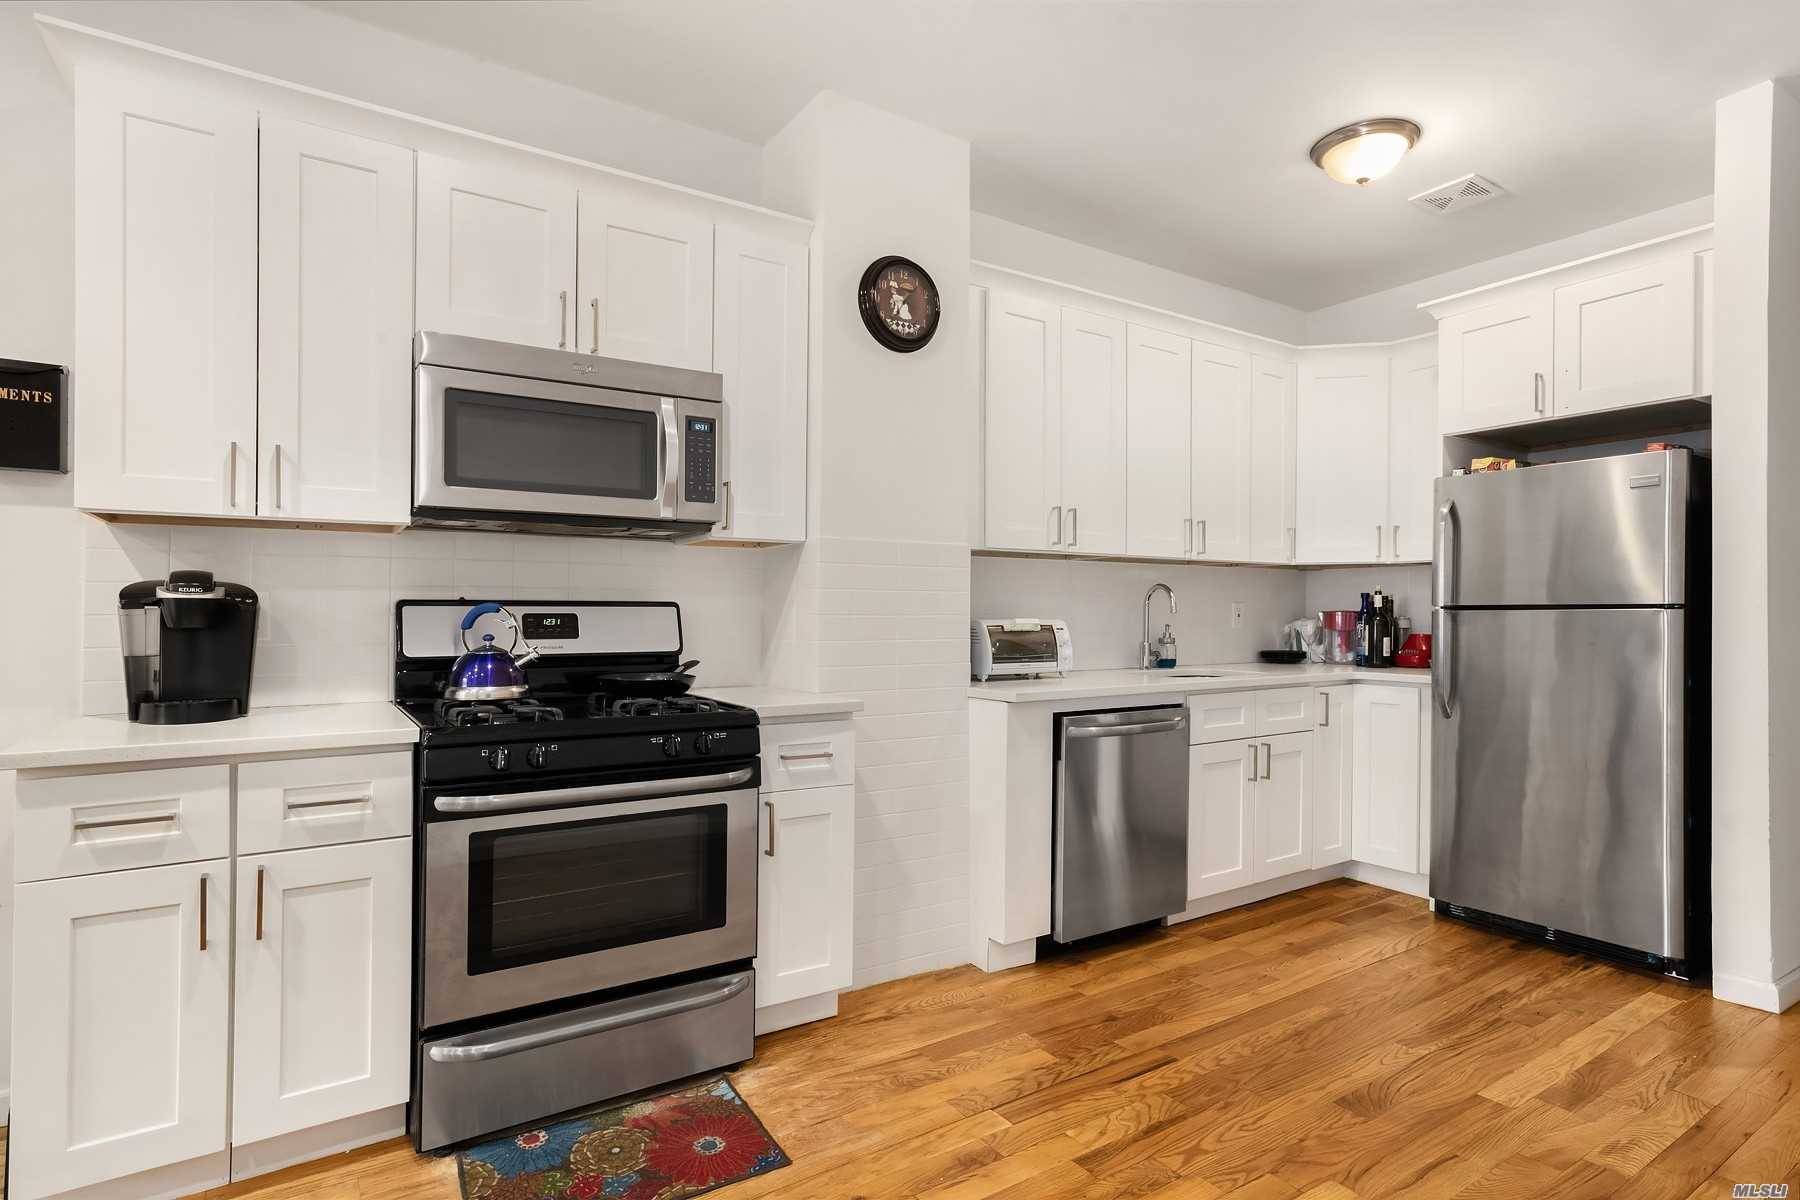 Brand New To Market ! This Three Family Investment Property Is Located On A Beautiful Tree Lined Street In East Flatbush, Brooklyn.